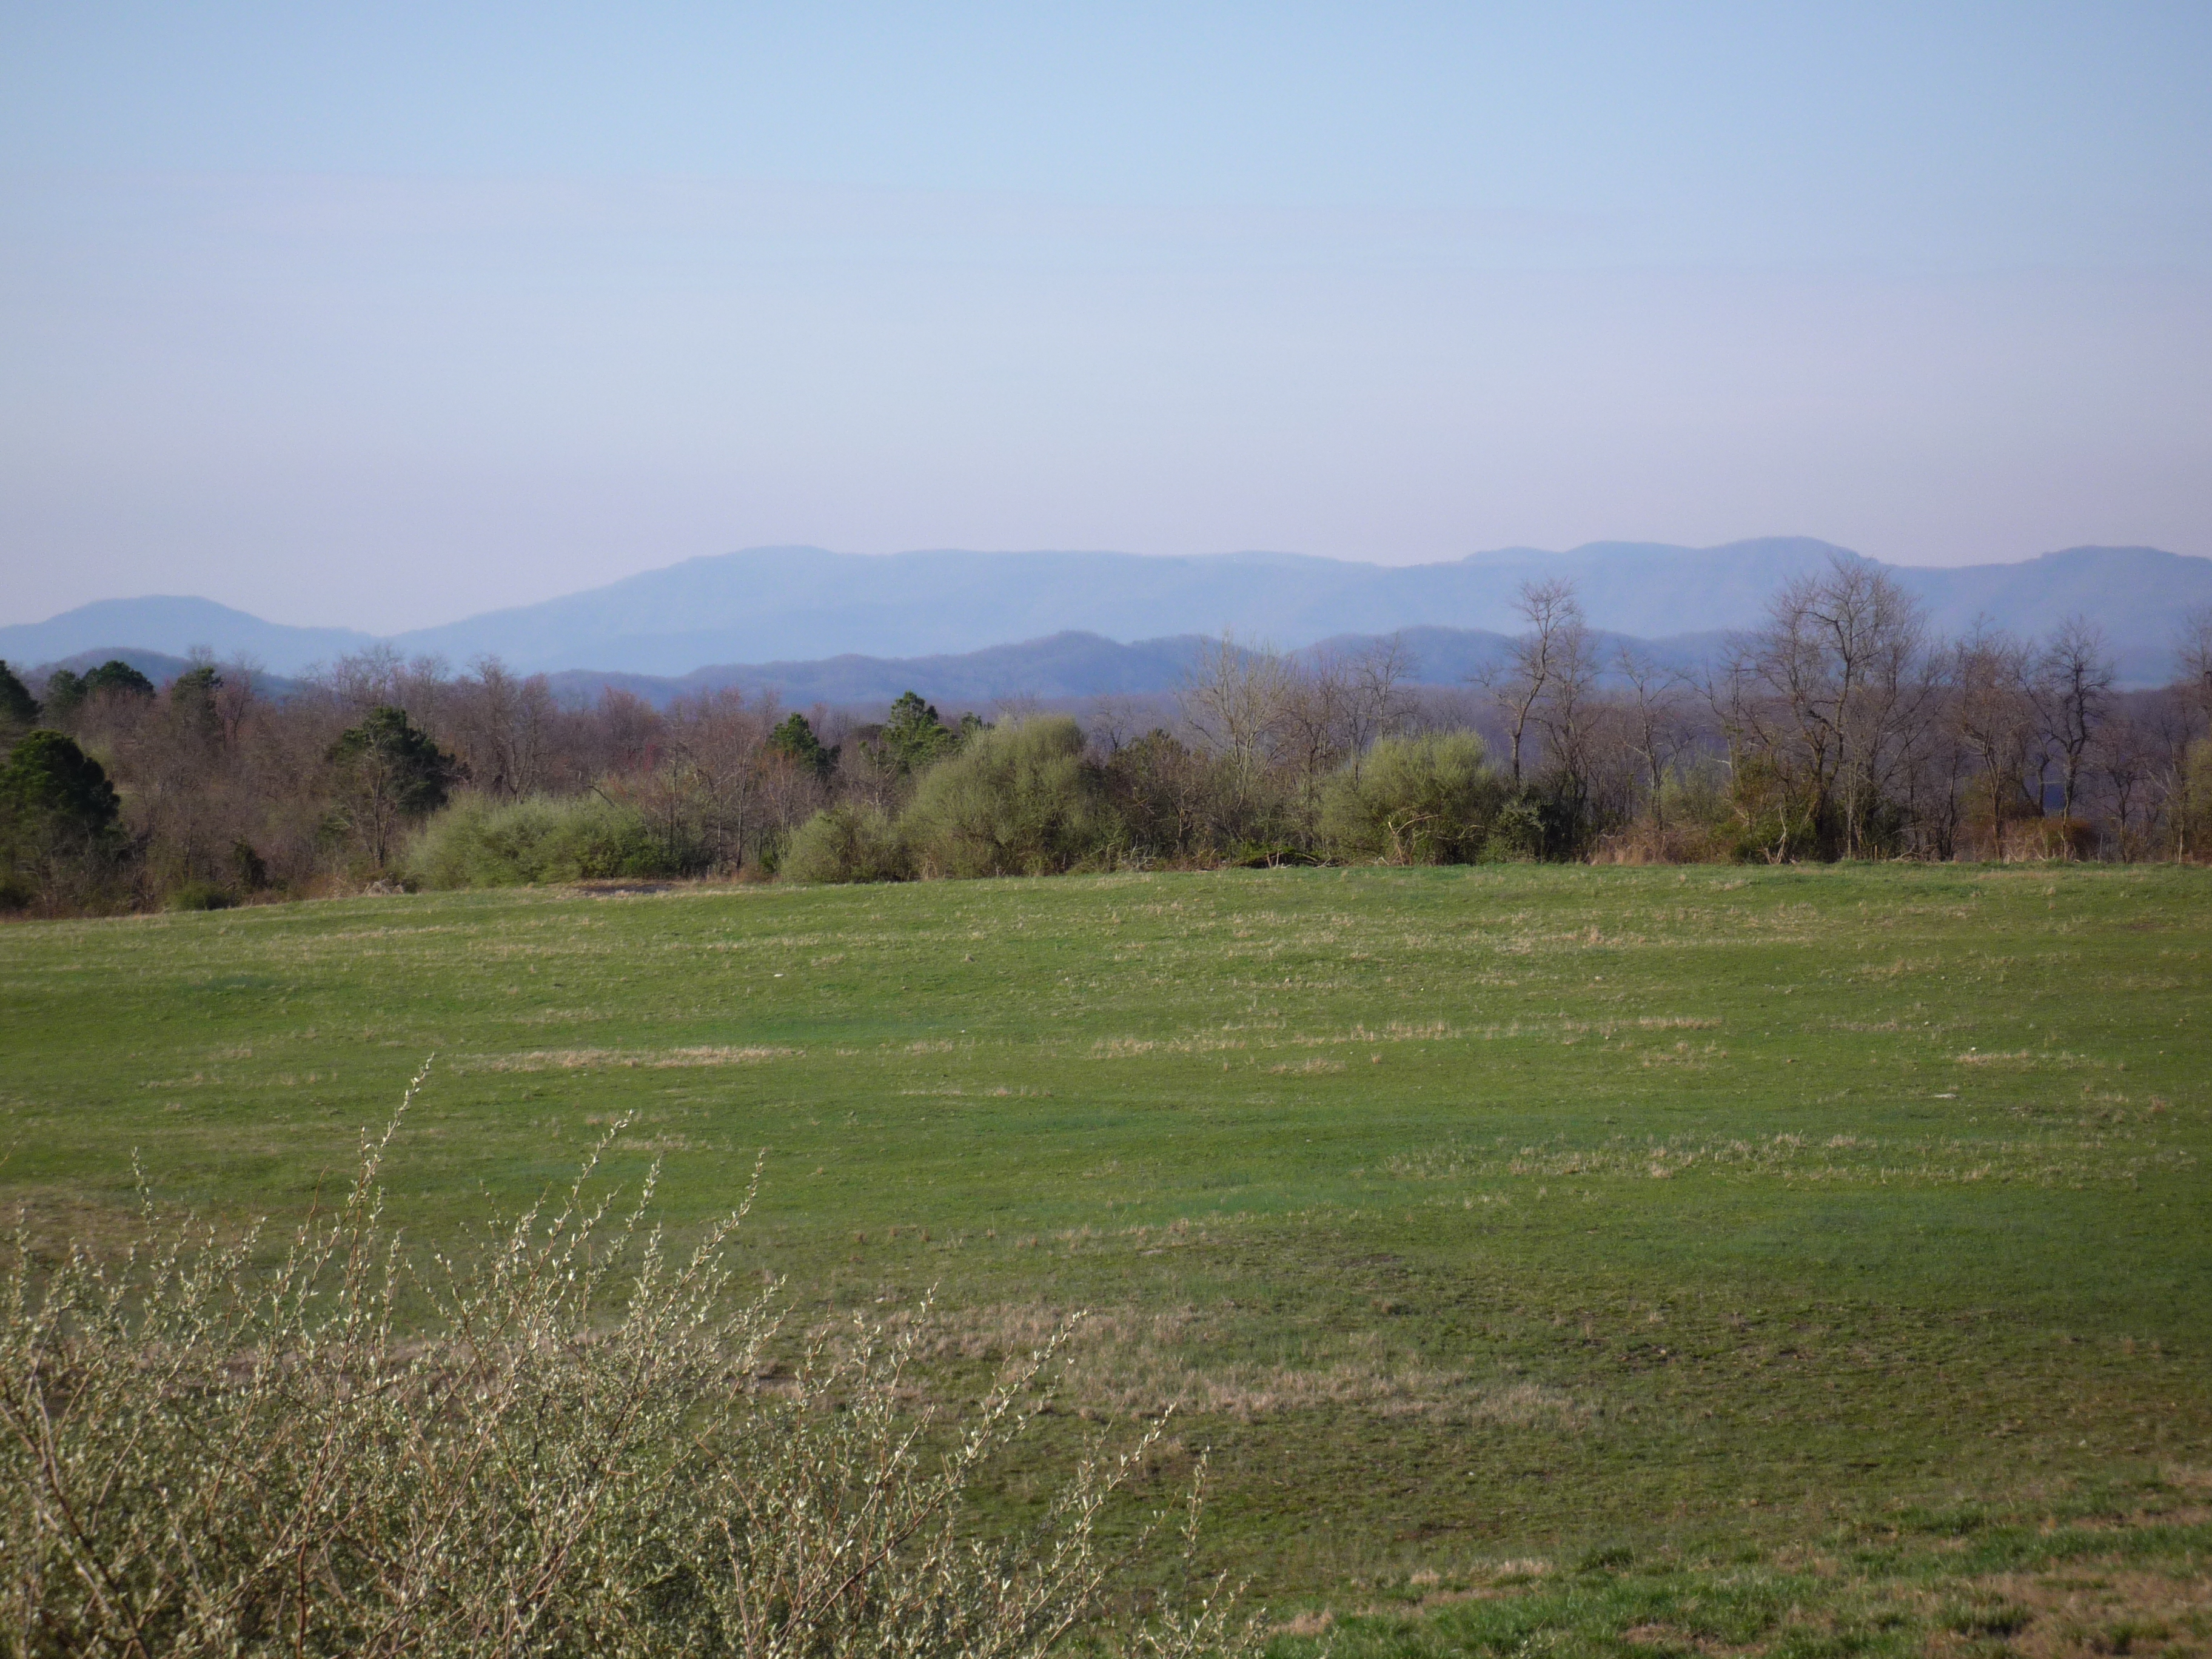 View of the Tennessee Lands Unsuitable for Mining petition area.